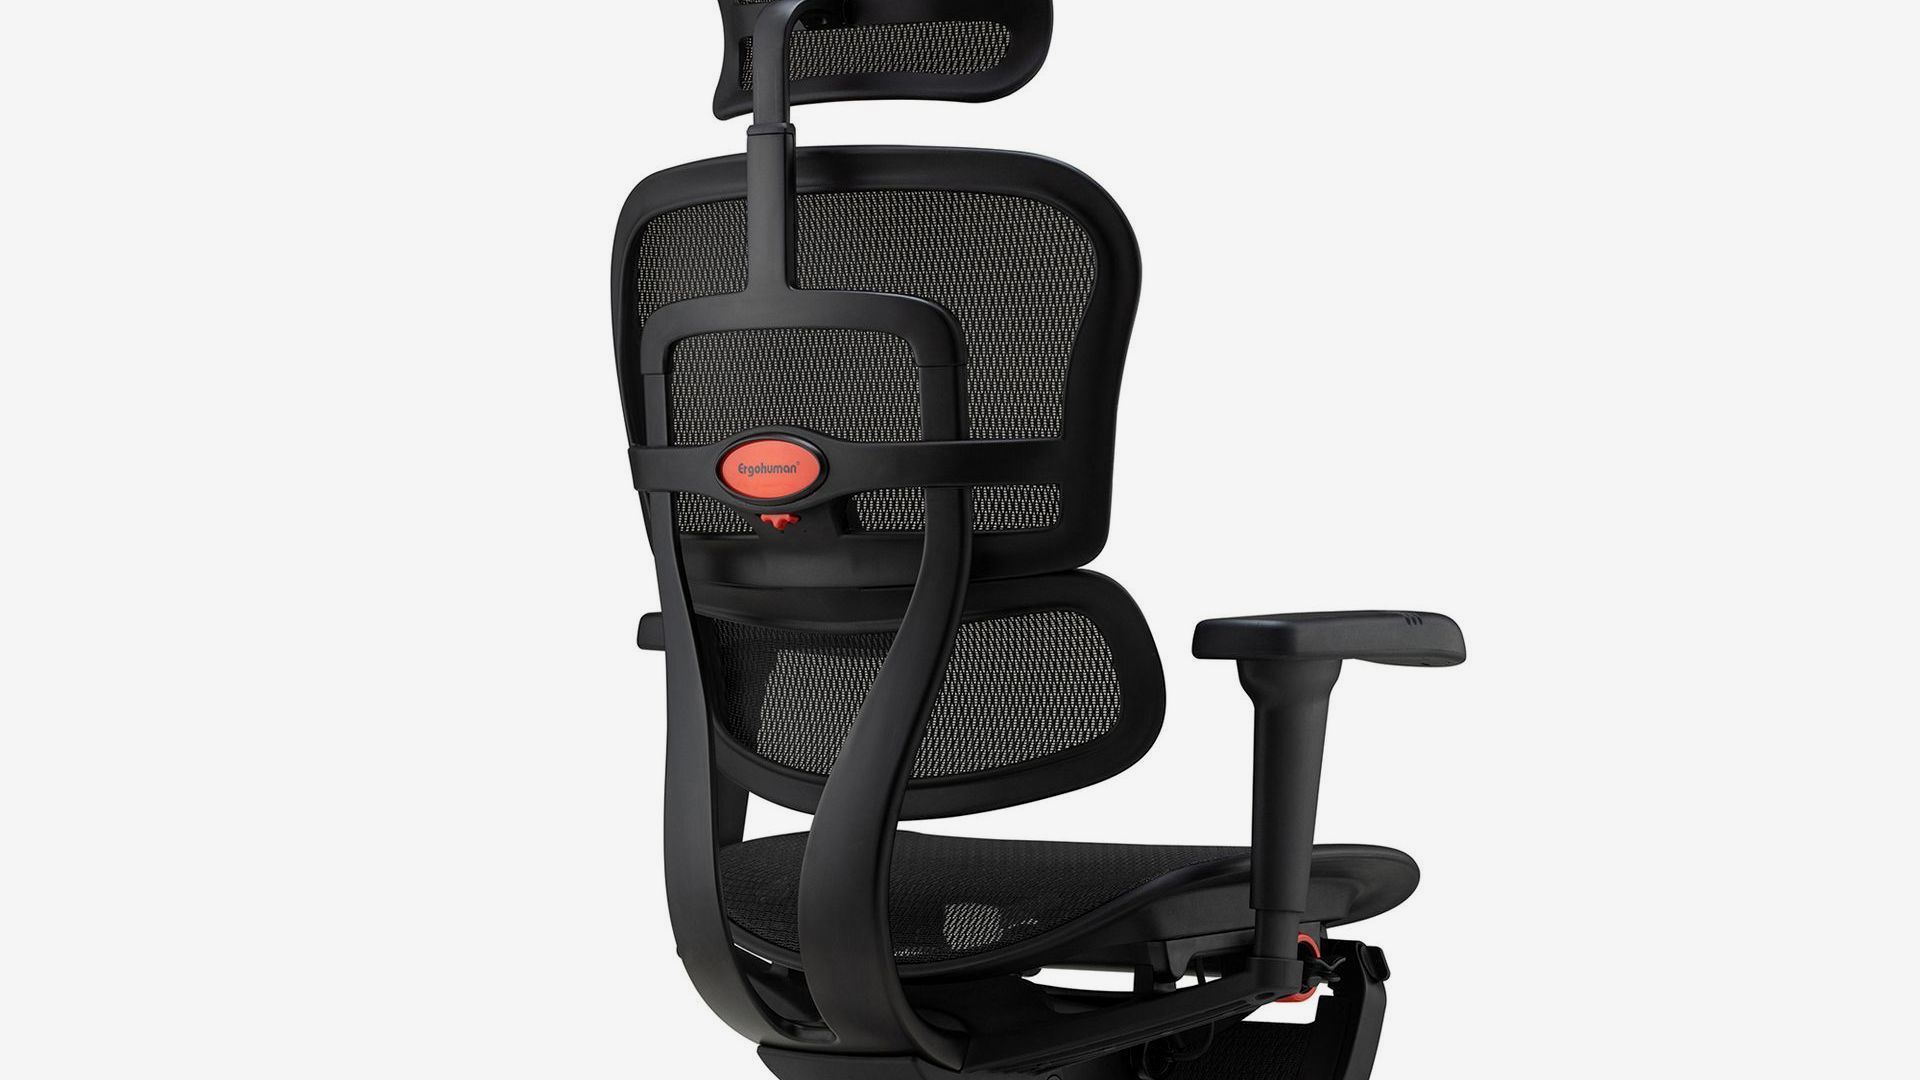 Ergohuman Ultra gaming chair with a black frame, facing back right at a 45-degree angle, against a white background